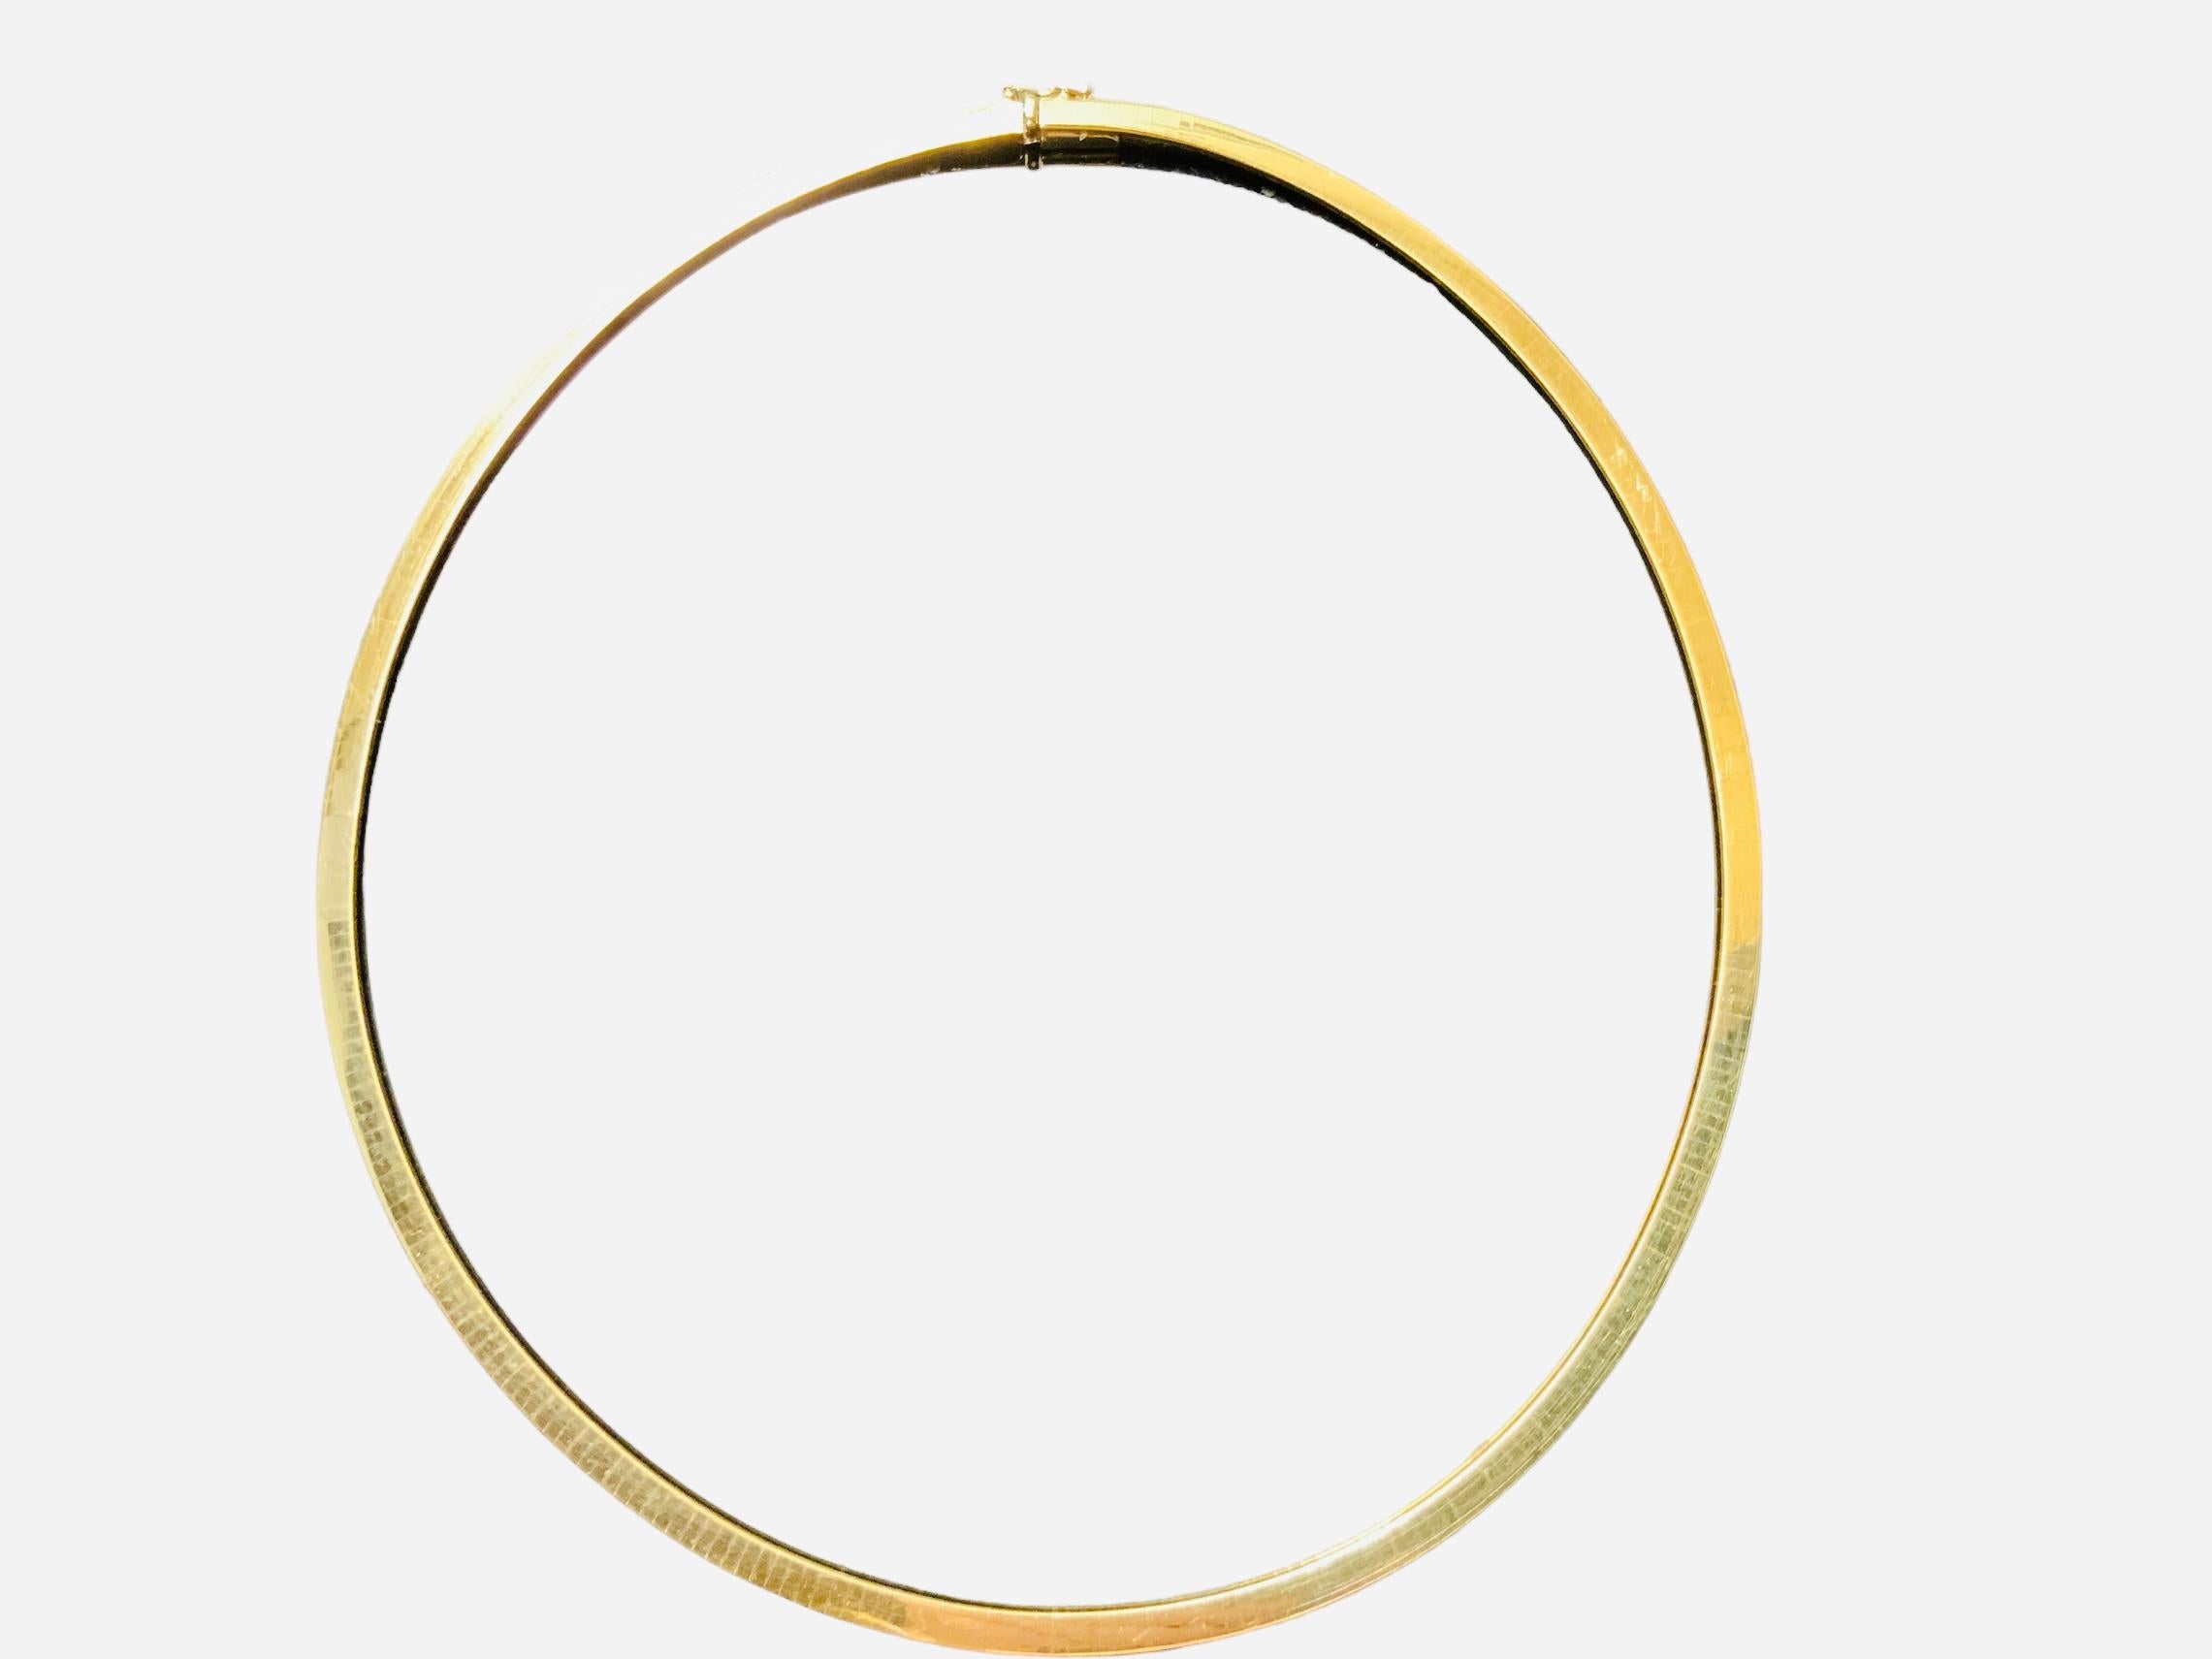 This is a 14K gold Omega link necklace. The necklace’s length is 17.75 inches and width is 4mm. It has a hidden box clasp with an eight safety lock. Its weight is 27.0 grams.